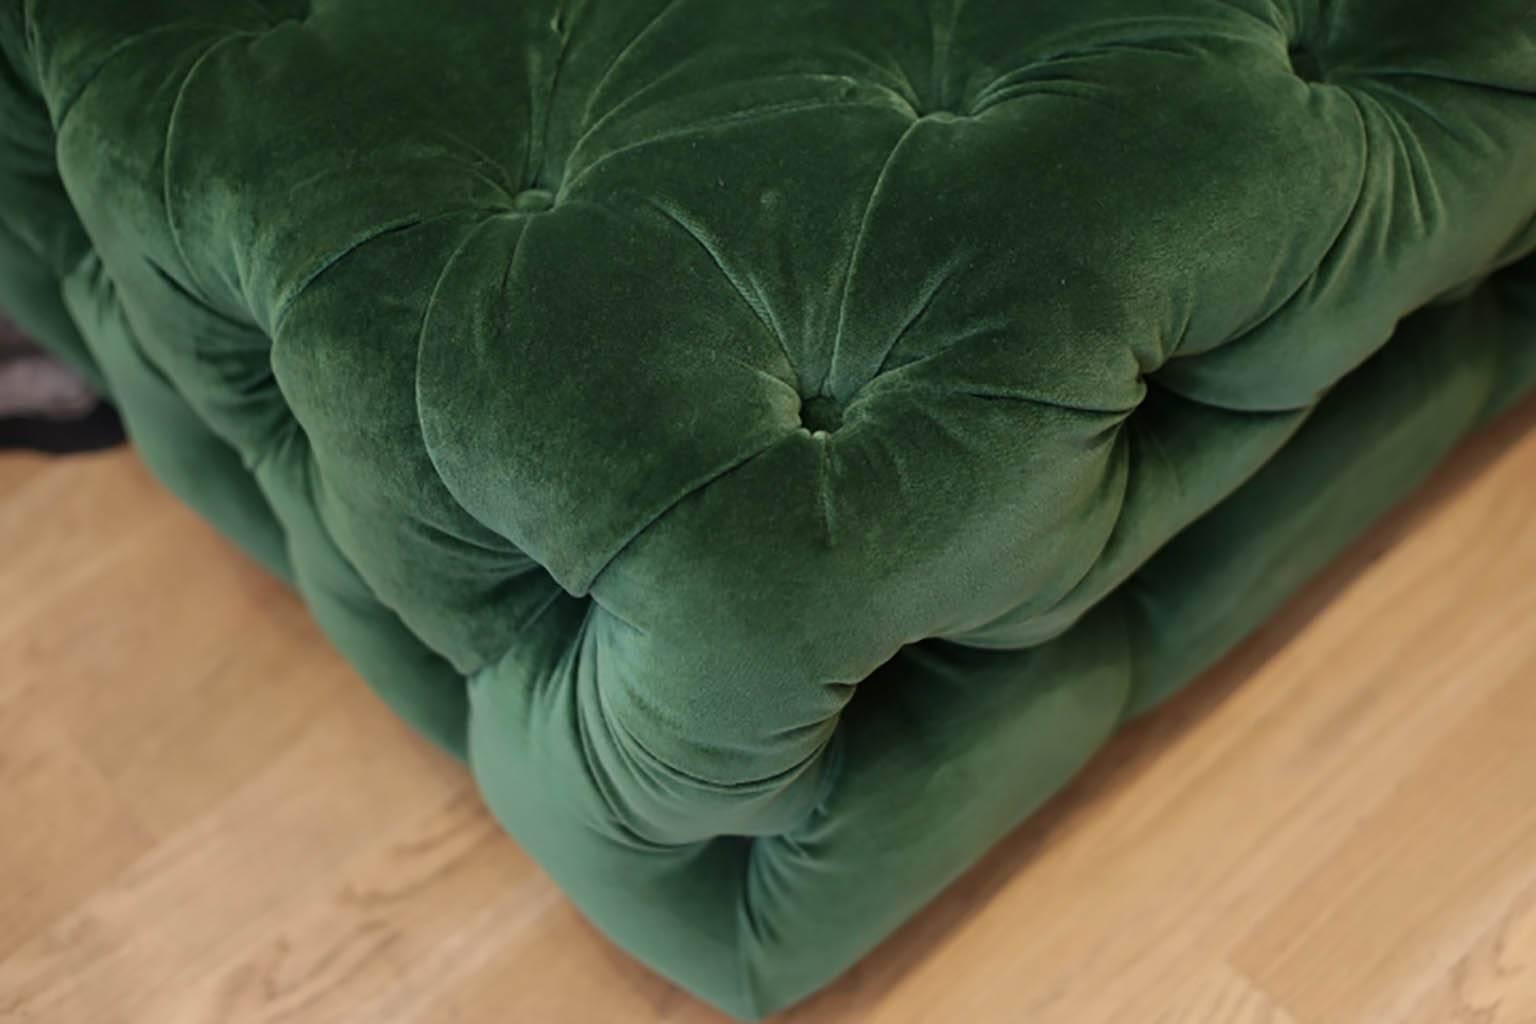 Large, Bronson tufted ottoman by Plantation, circa 2015. Reupholstered in room and board 